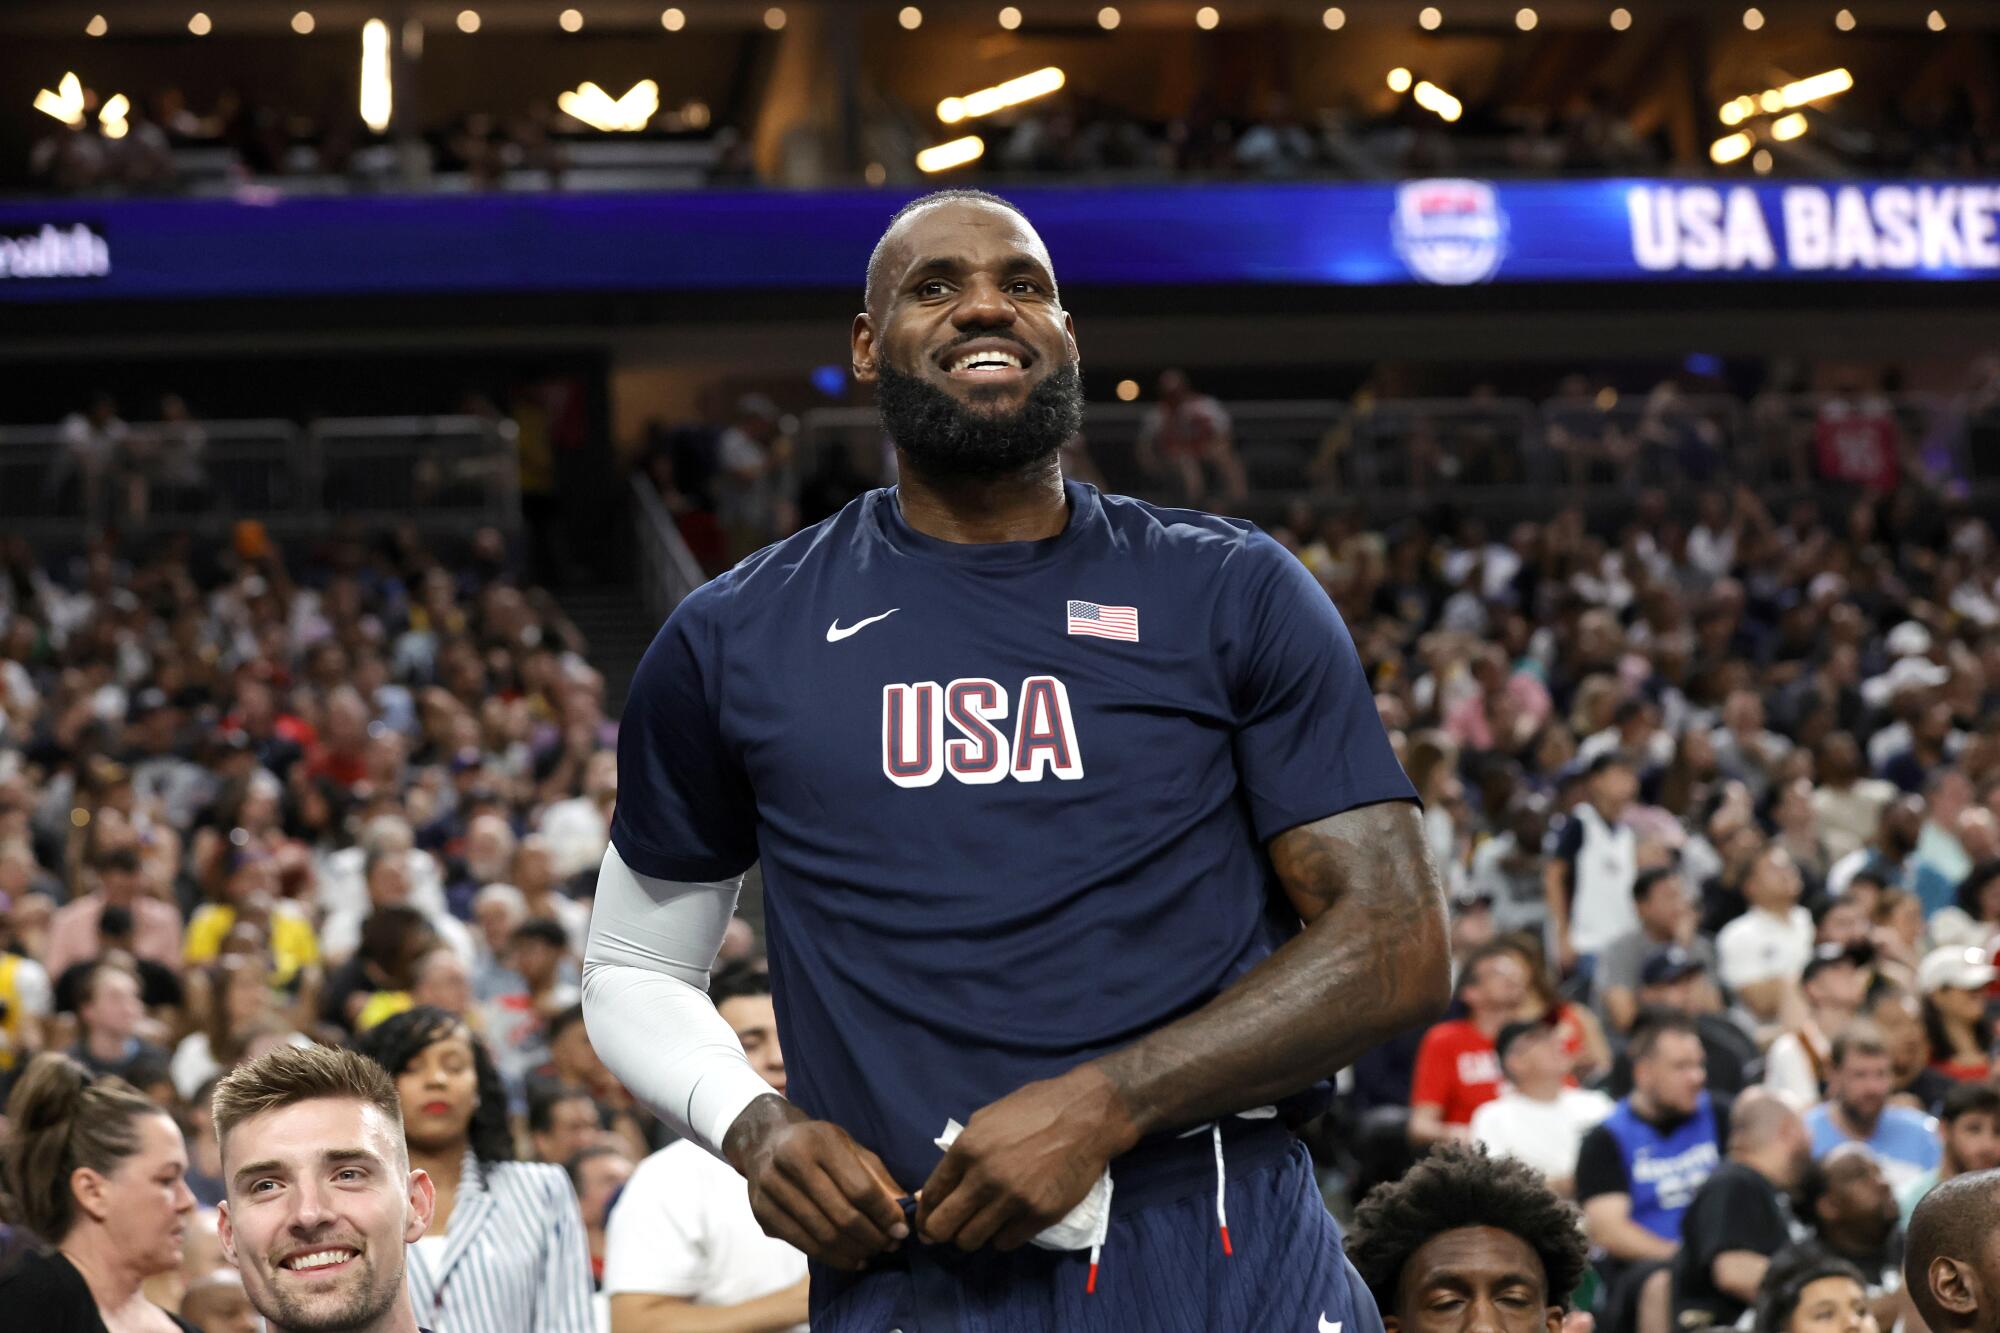 Team USA forward LeBron James stands near the bench in his warmups during the an exhibition game against Canada on Wednesday.